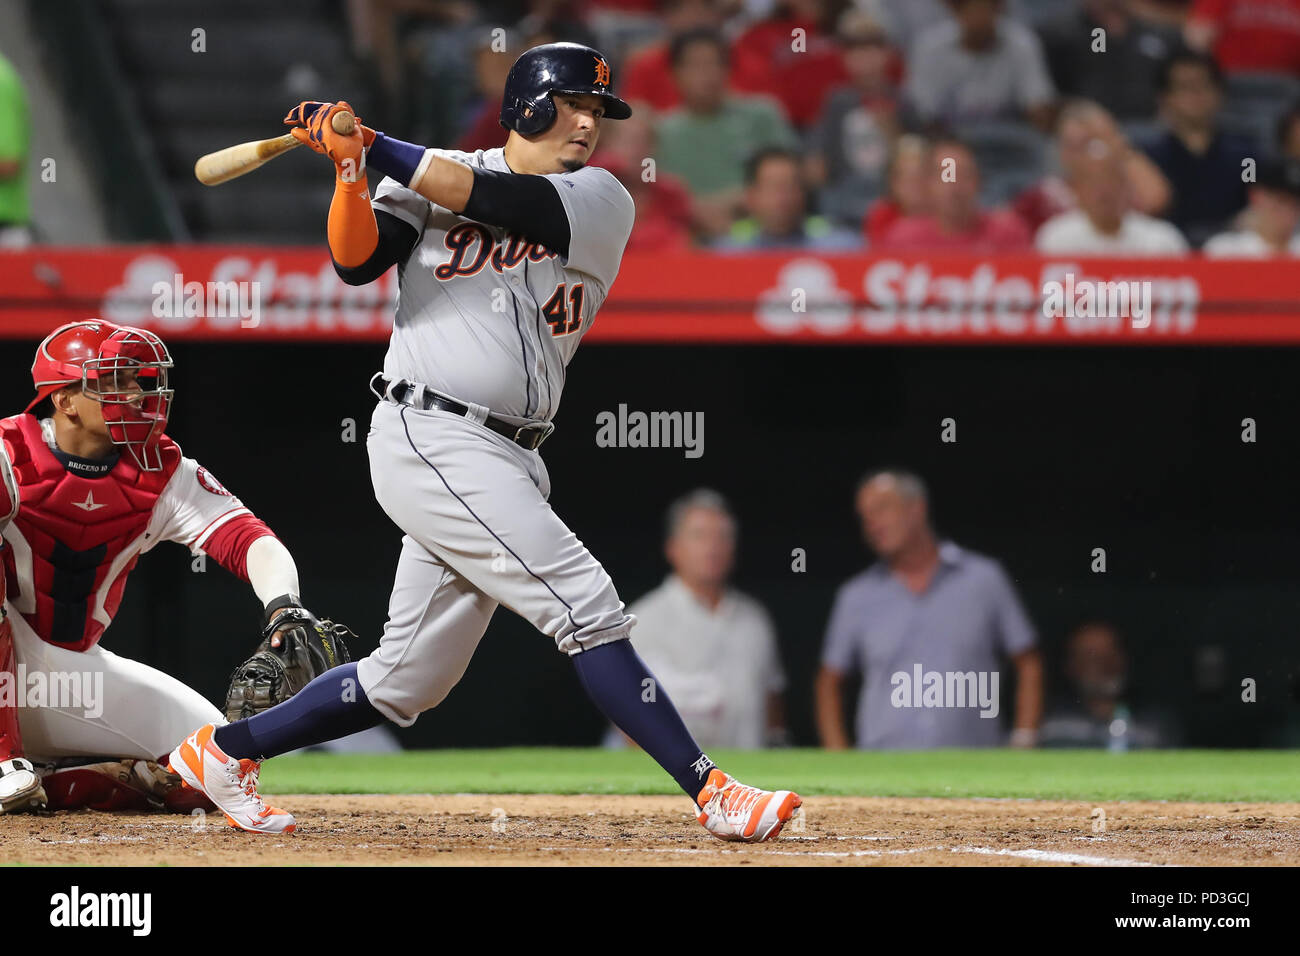 Los Angeles, USA. August 6, 2018: Detroit Tigers designated hitter Victor Martinez (41) eyes a grounder down the line that went just foul in the game between the Detroit Tigers and Los Angeles Angels of Anaheim, Angel Stadium in Anaheim, CA, Photographer: Peter Joneleit Credit: Cal Sport Media/Alamy Live News Stock Photo